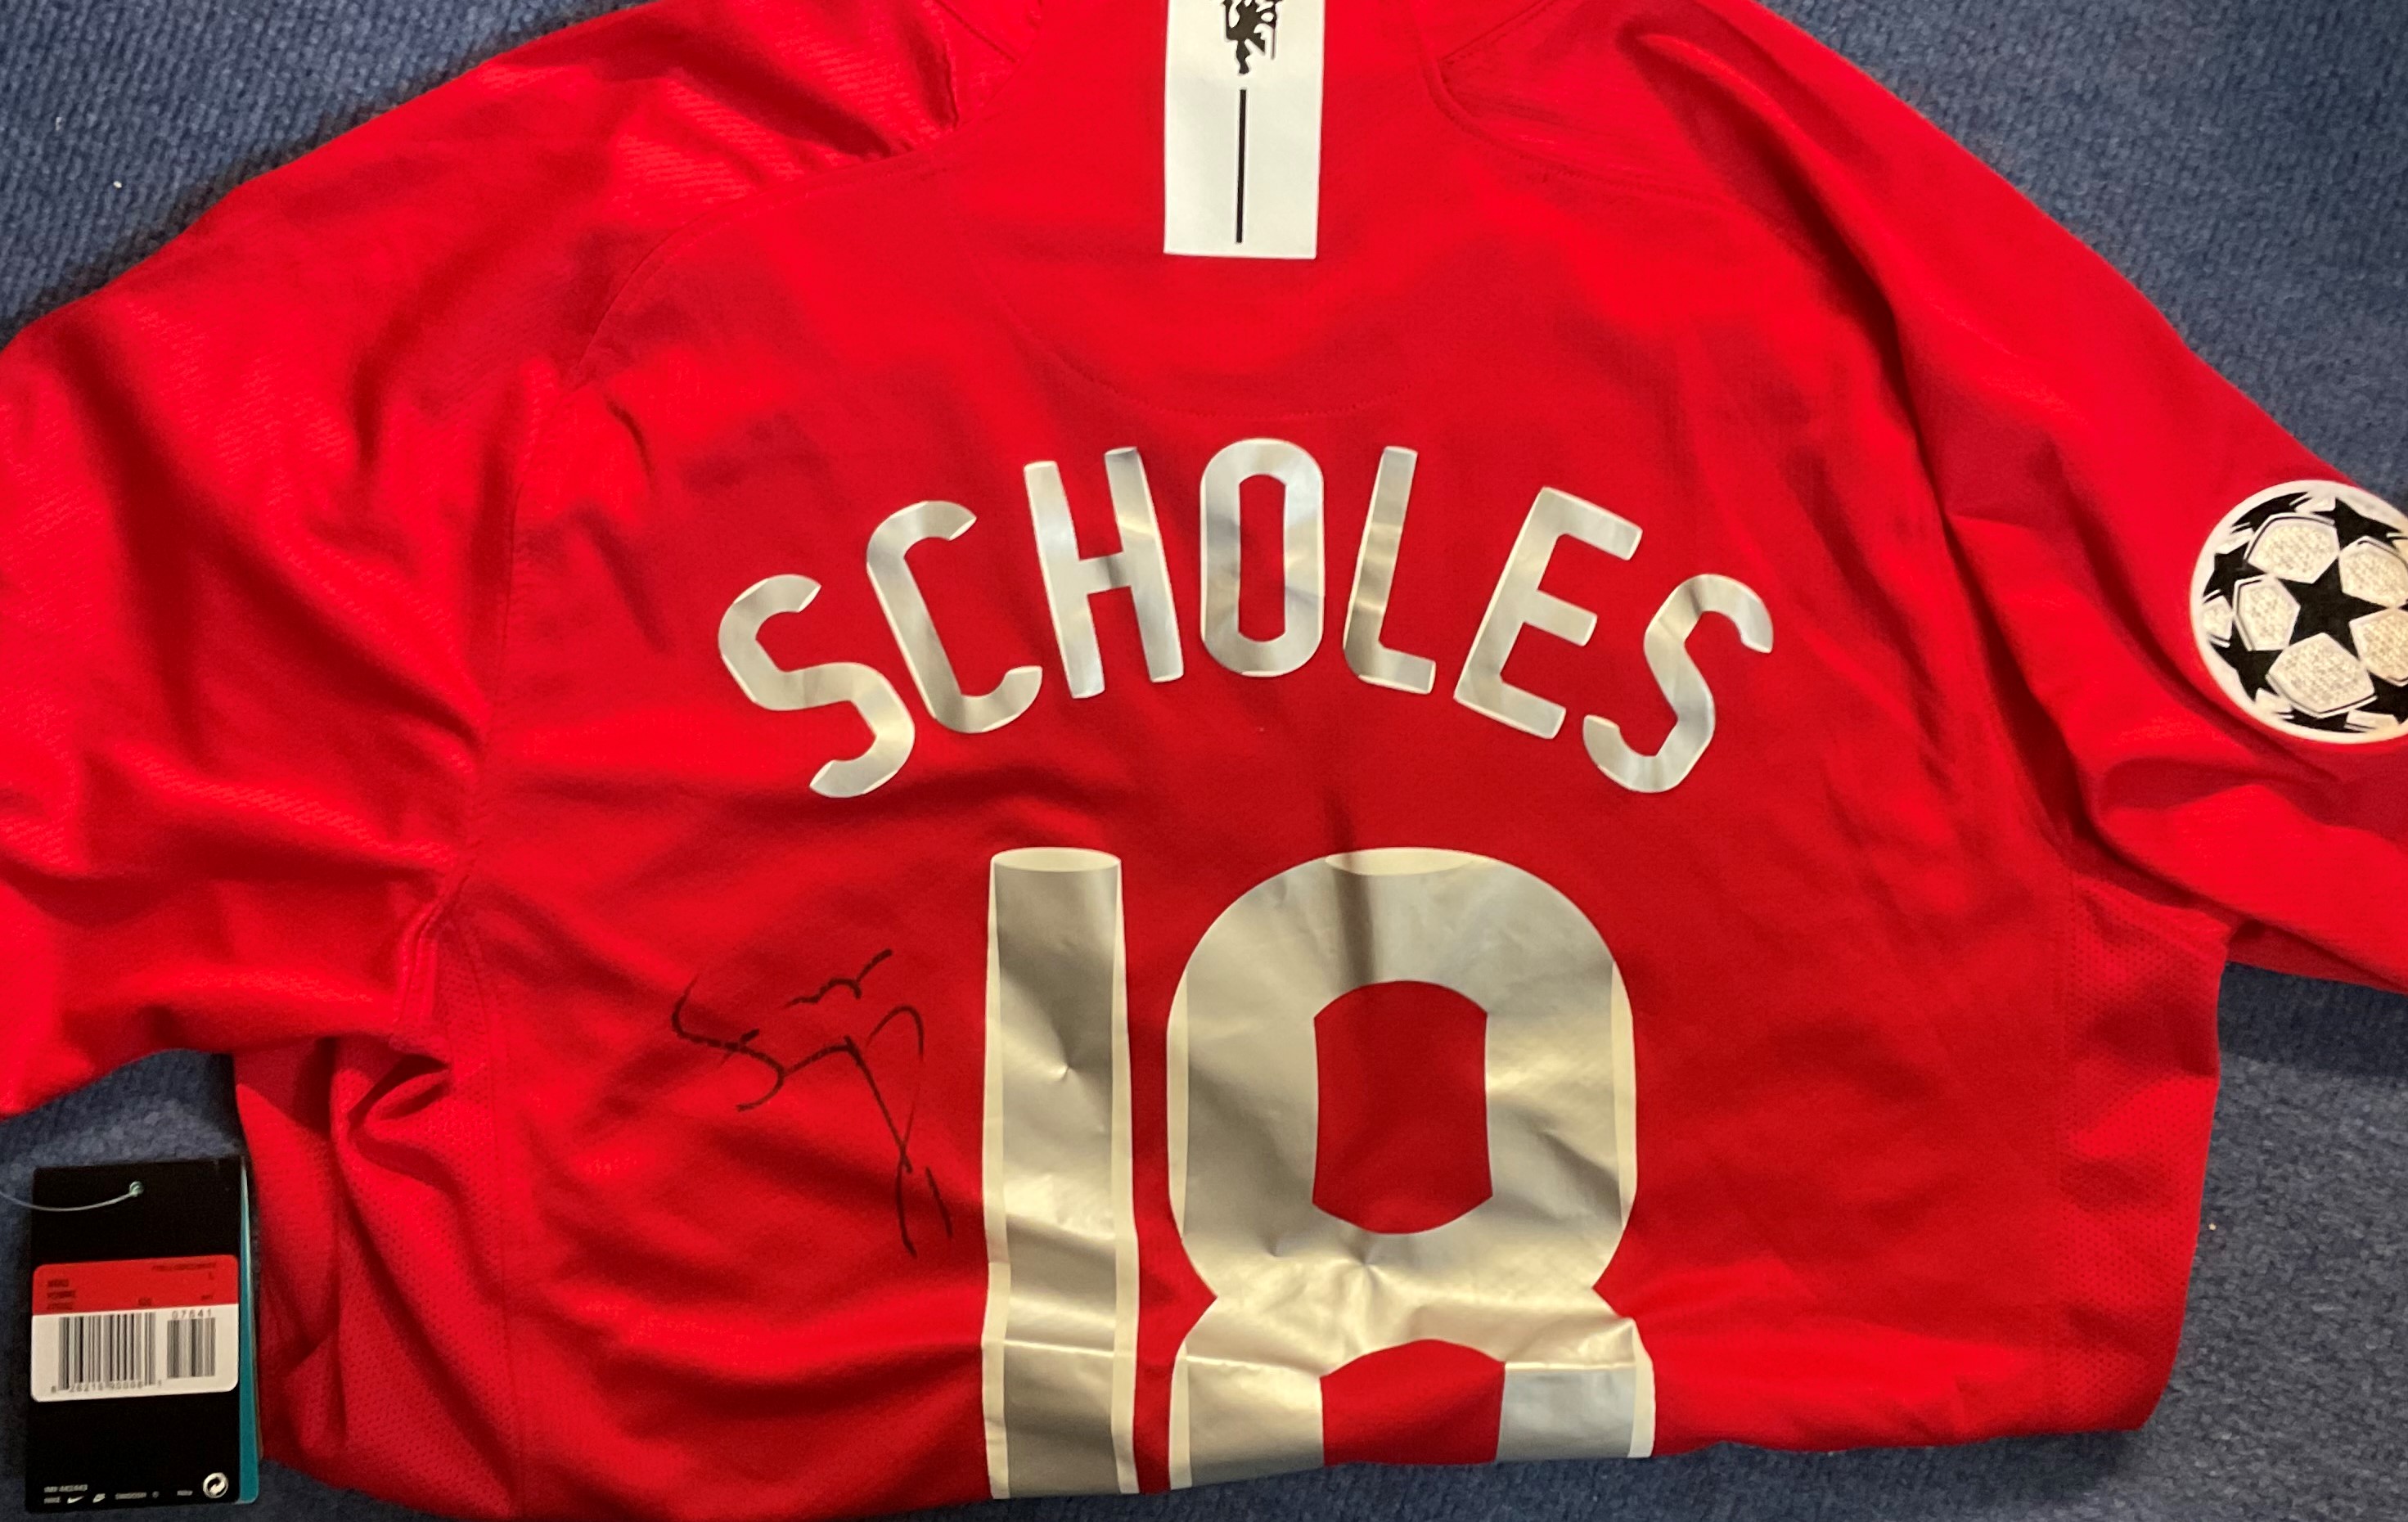 Manchester United Legend Paul Scholes Hand signed Nike Manchester United Shirt from the Final in